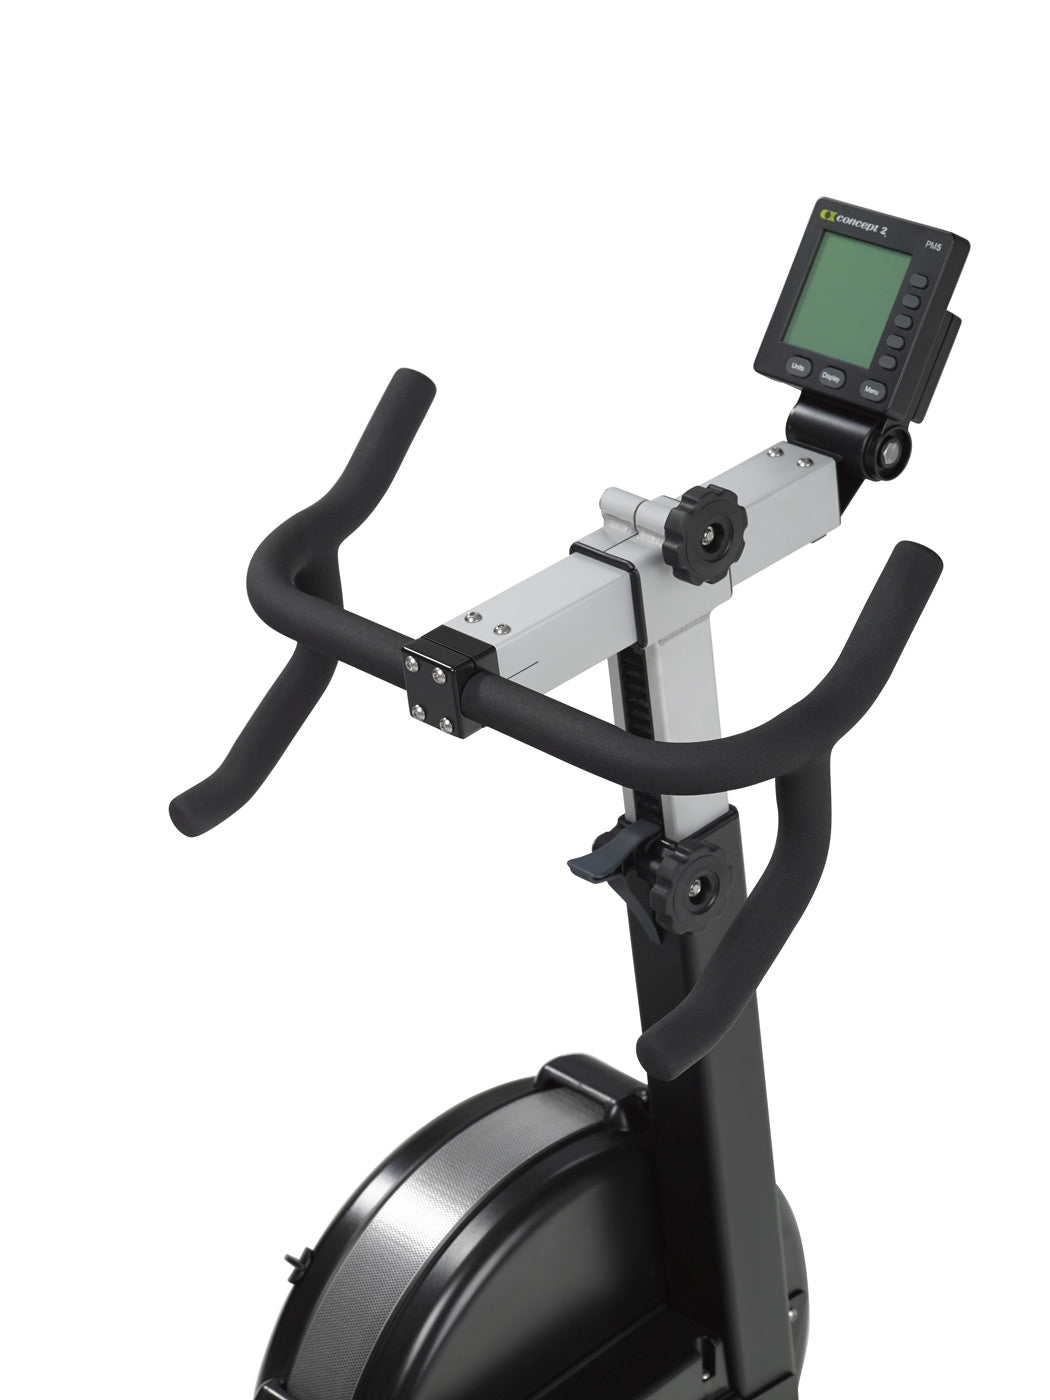 the handlebars and console monitor for a concept2 bikeerg